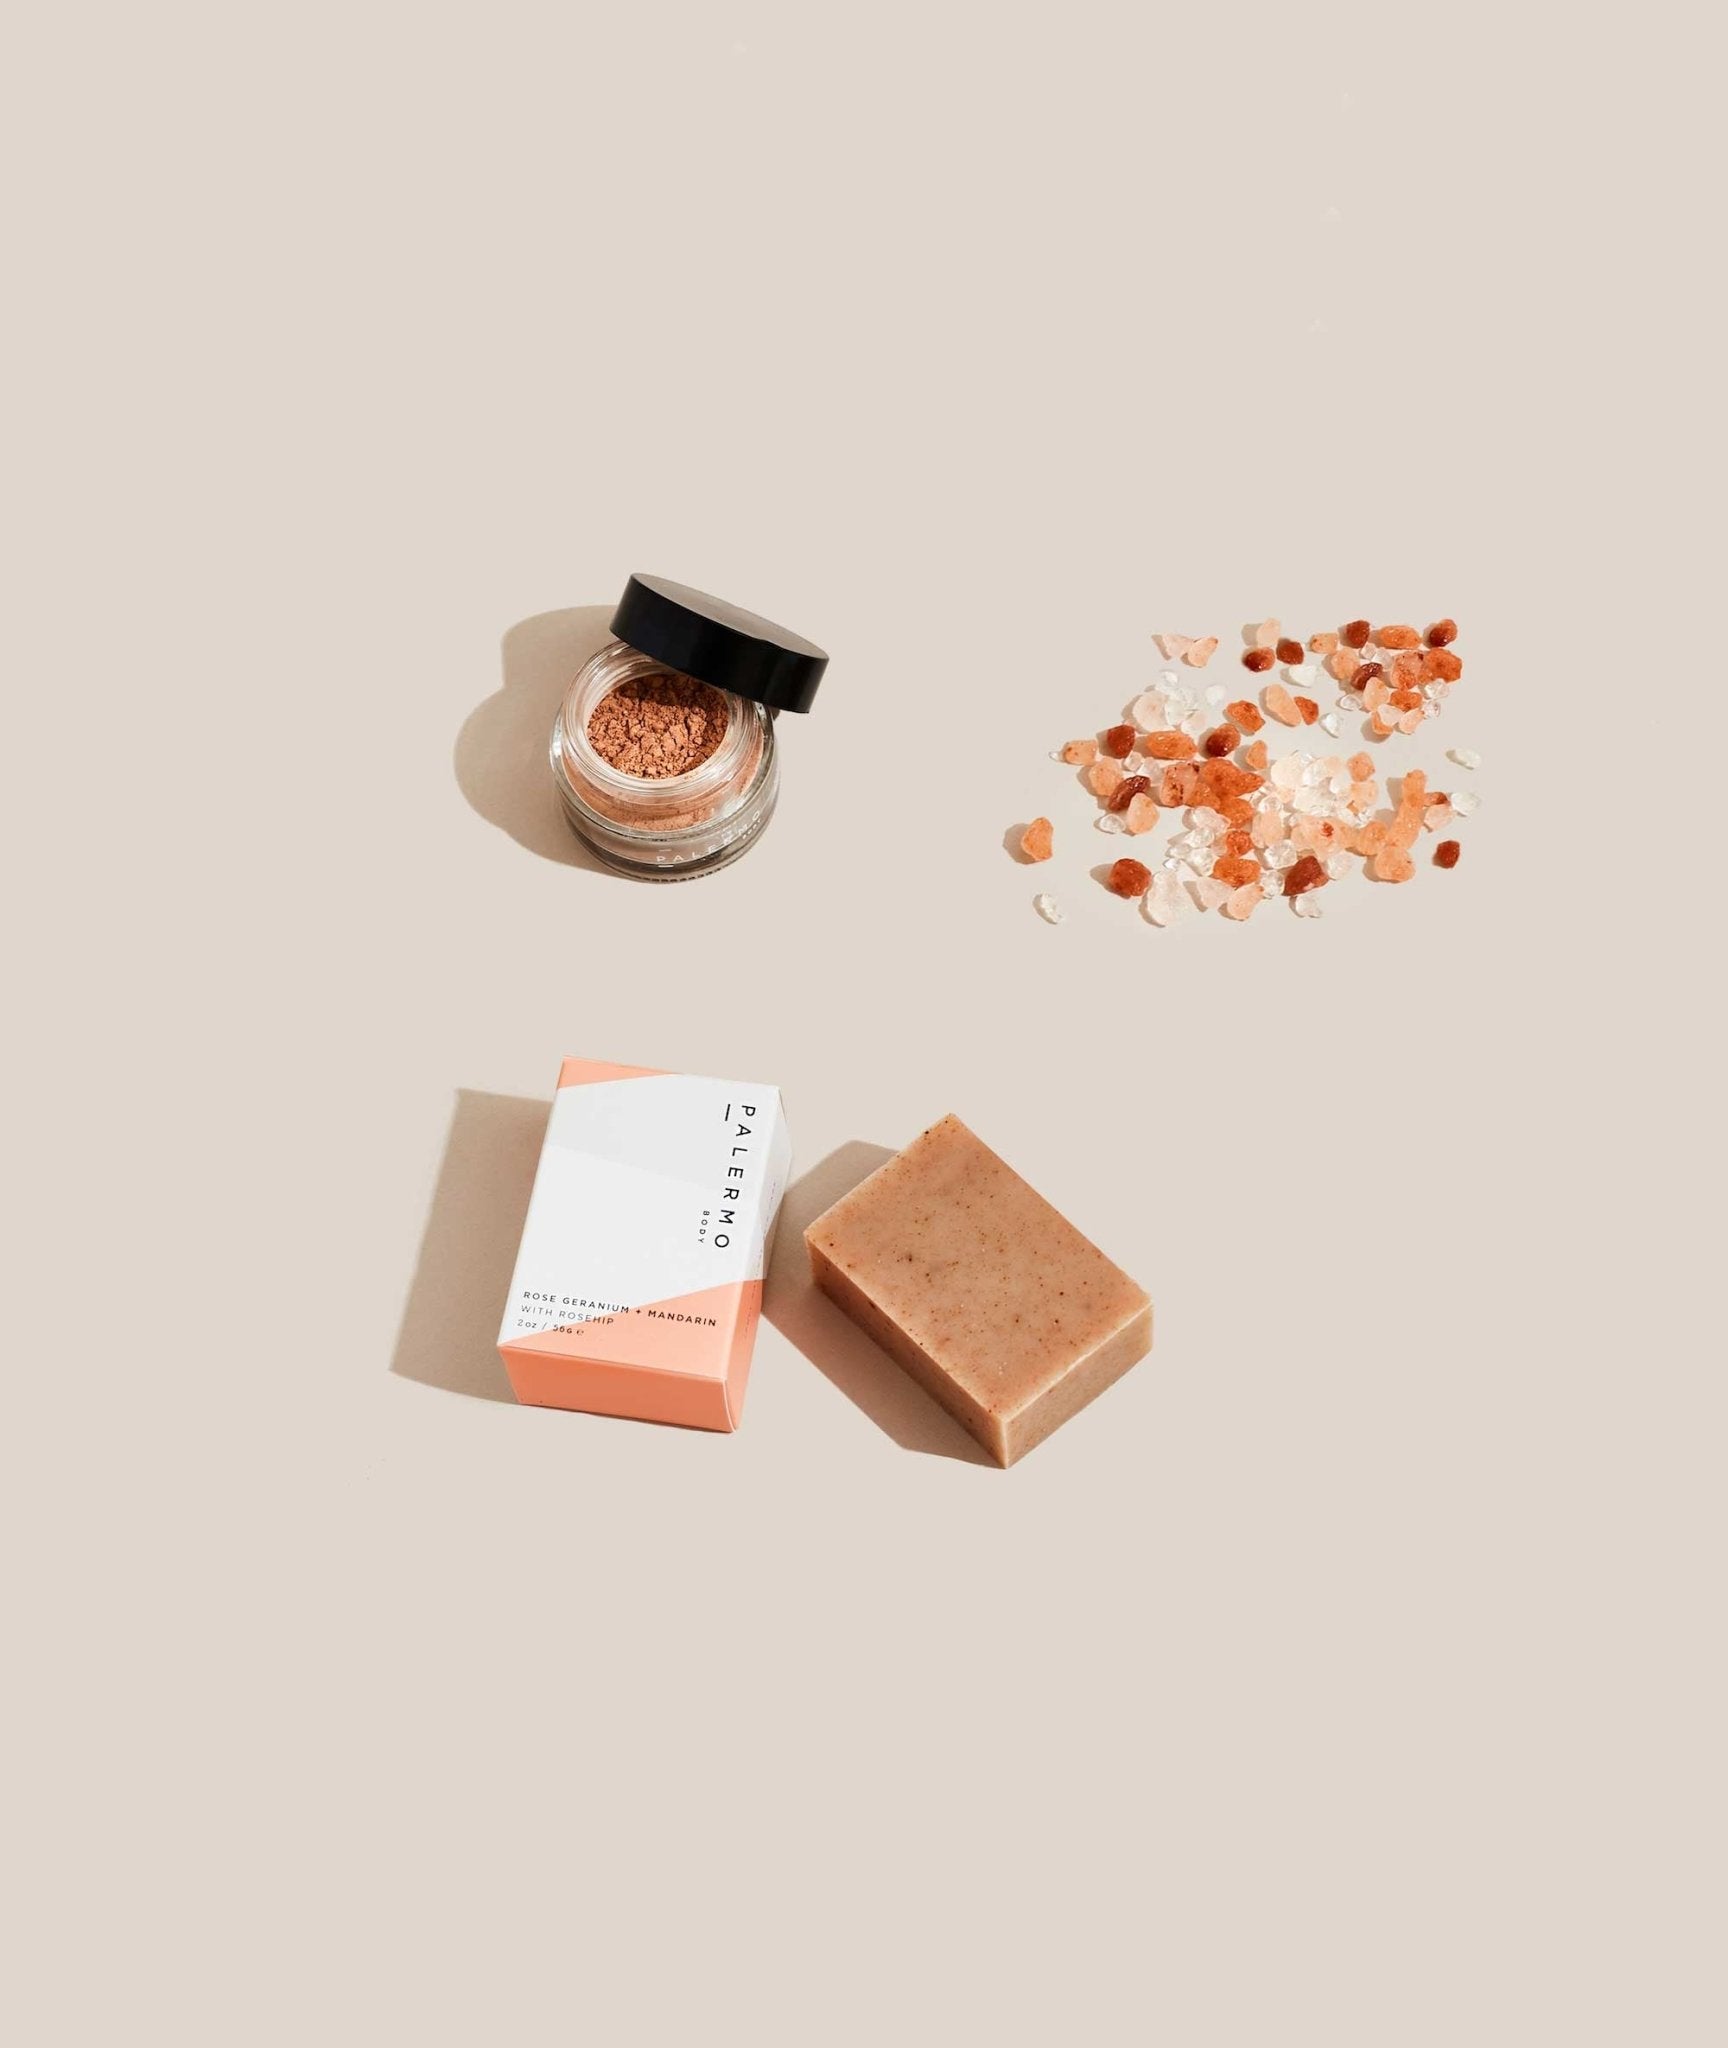 Renew + Replenish Mindful Kit by Palermo Body Leaves of Leisure